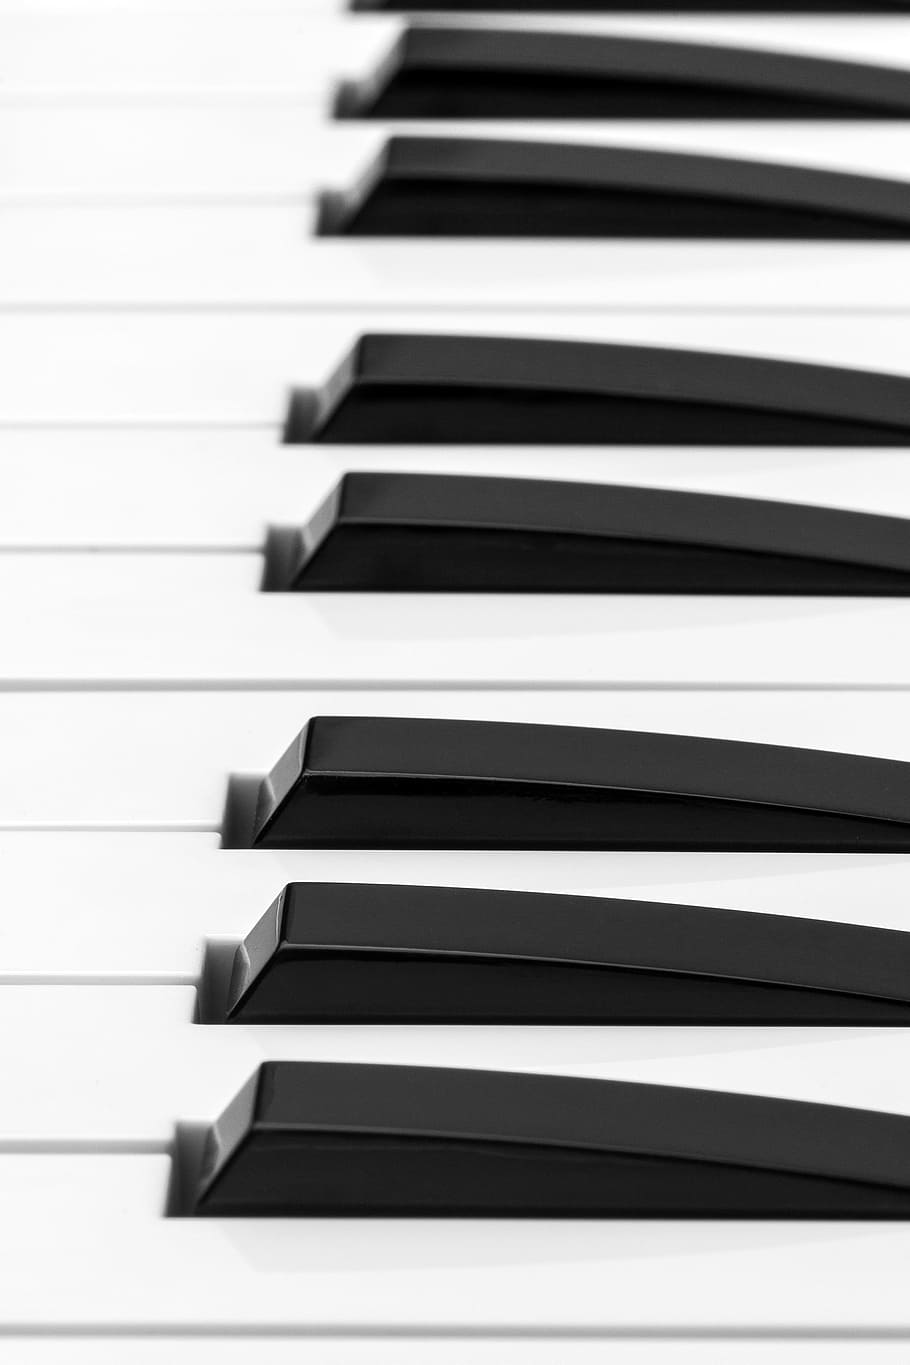 White and Black Piano Keys, black and white, close-up, instrument, HD wallpaper